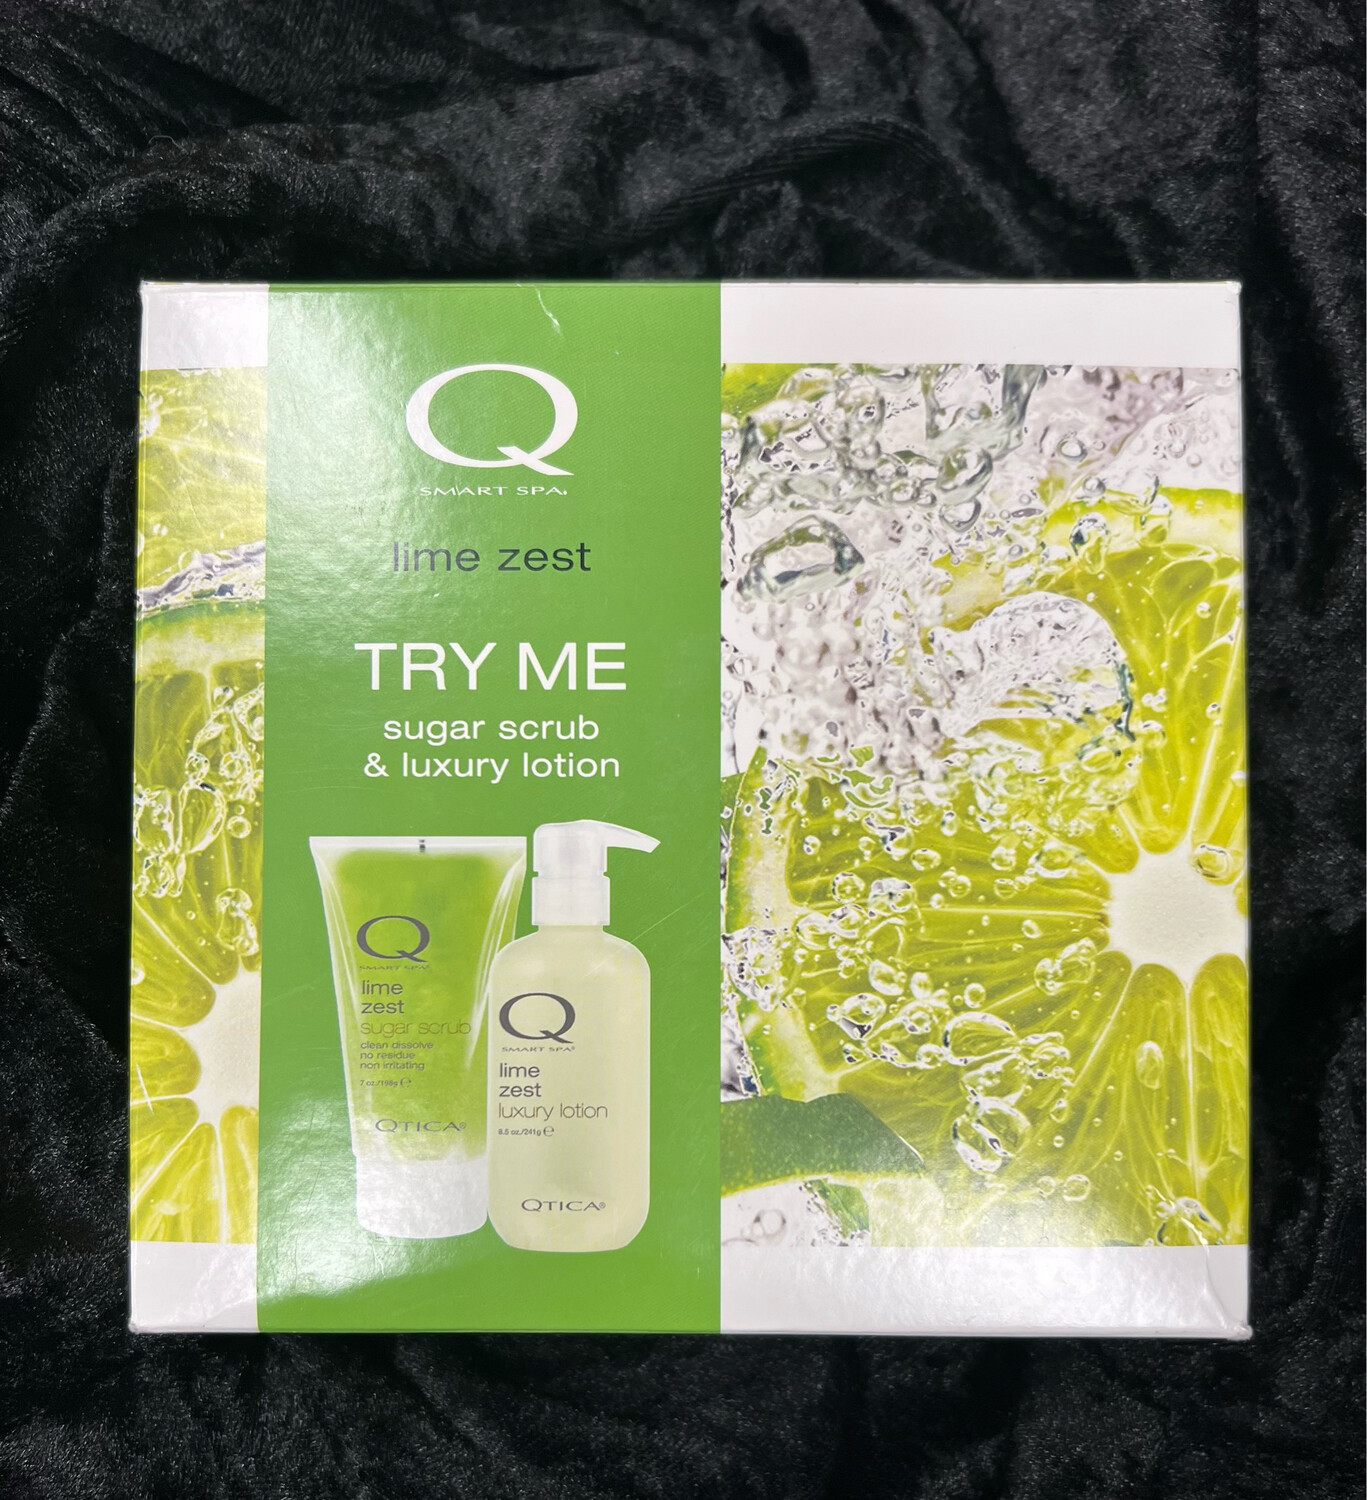 Qtica Lime Zest Try Me